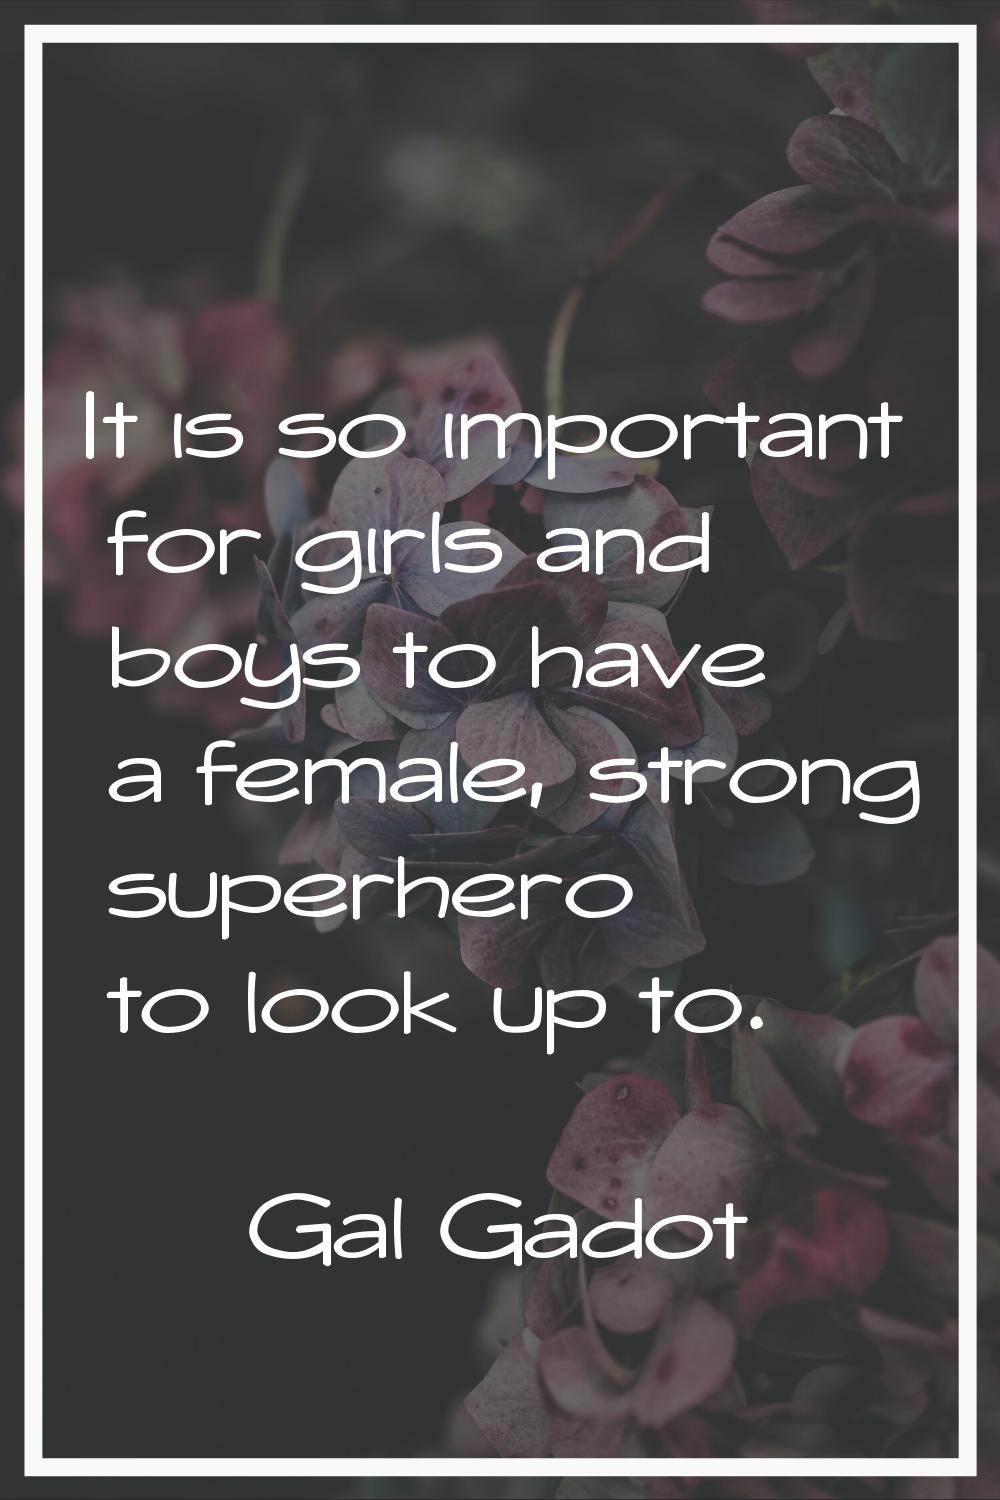 It is so important for girls and boys to have a female, strong superhero to look up to.